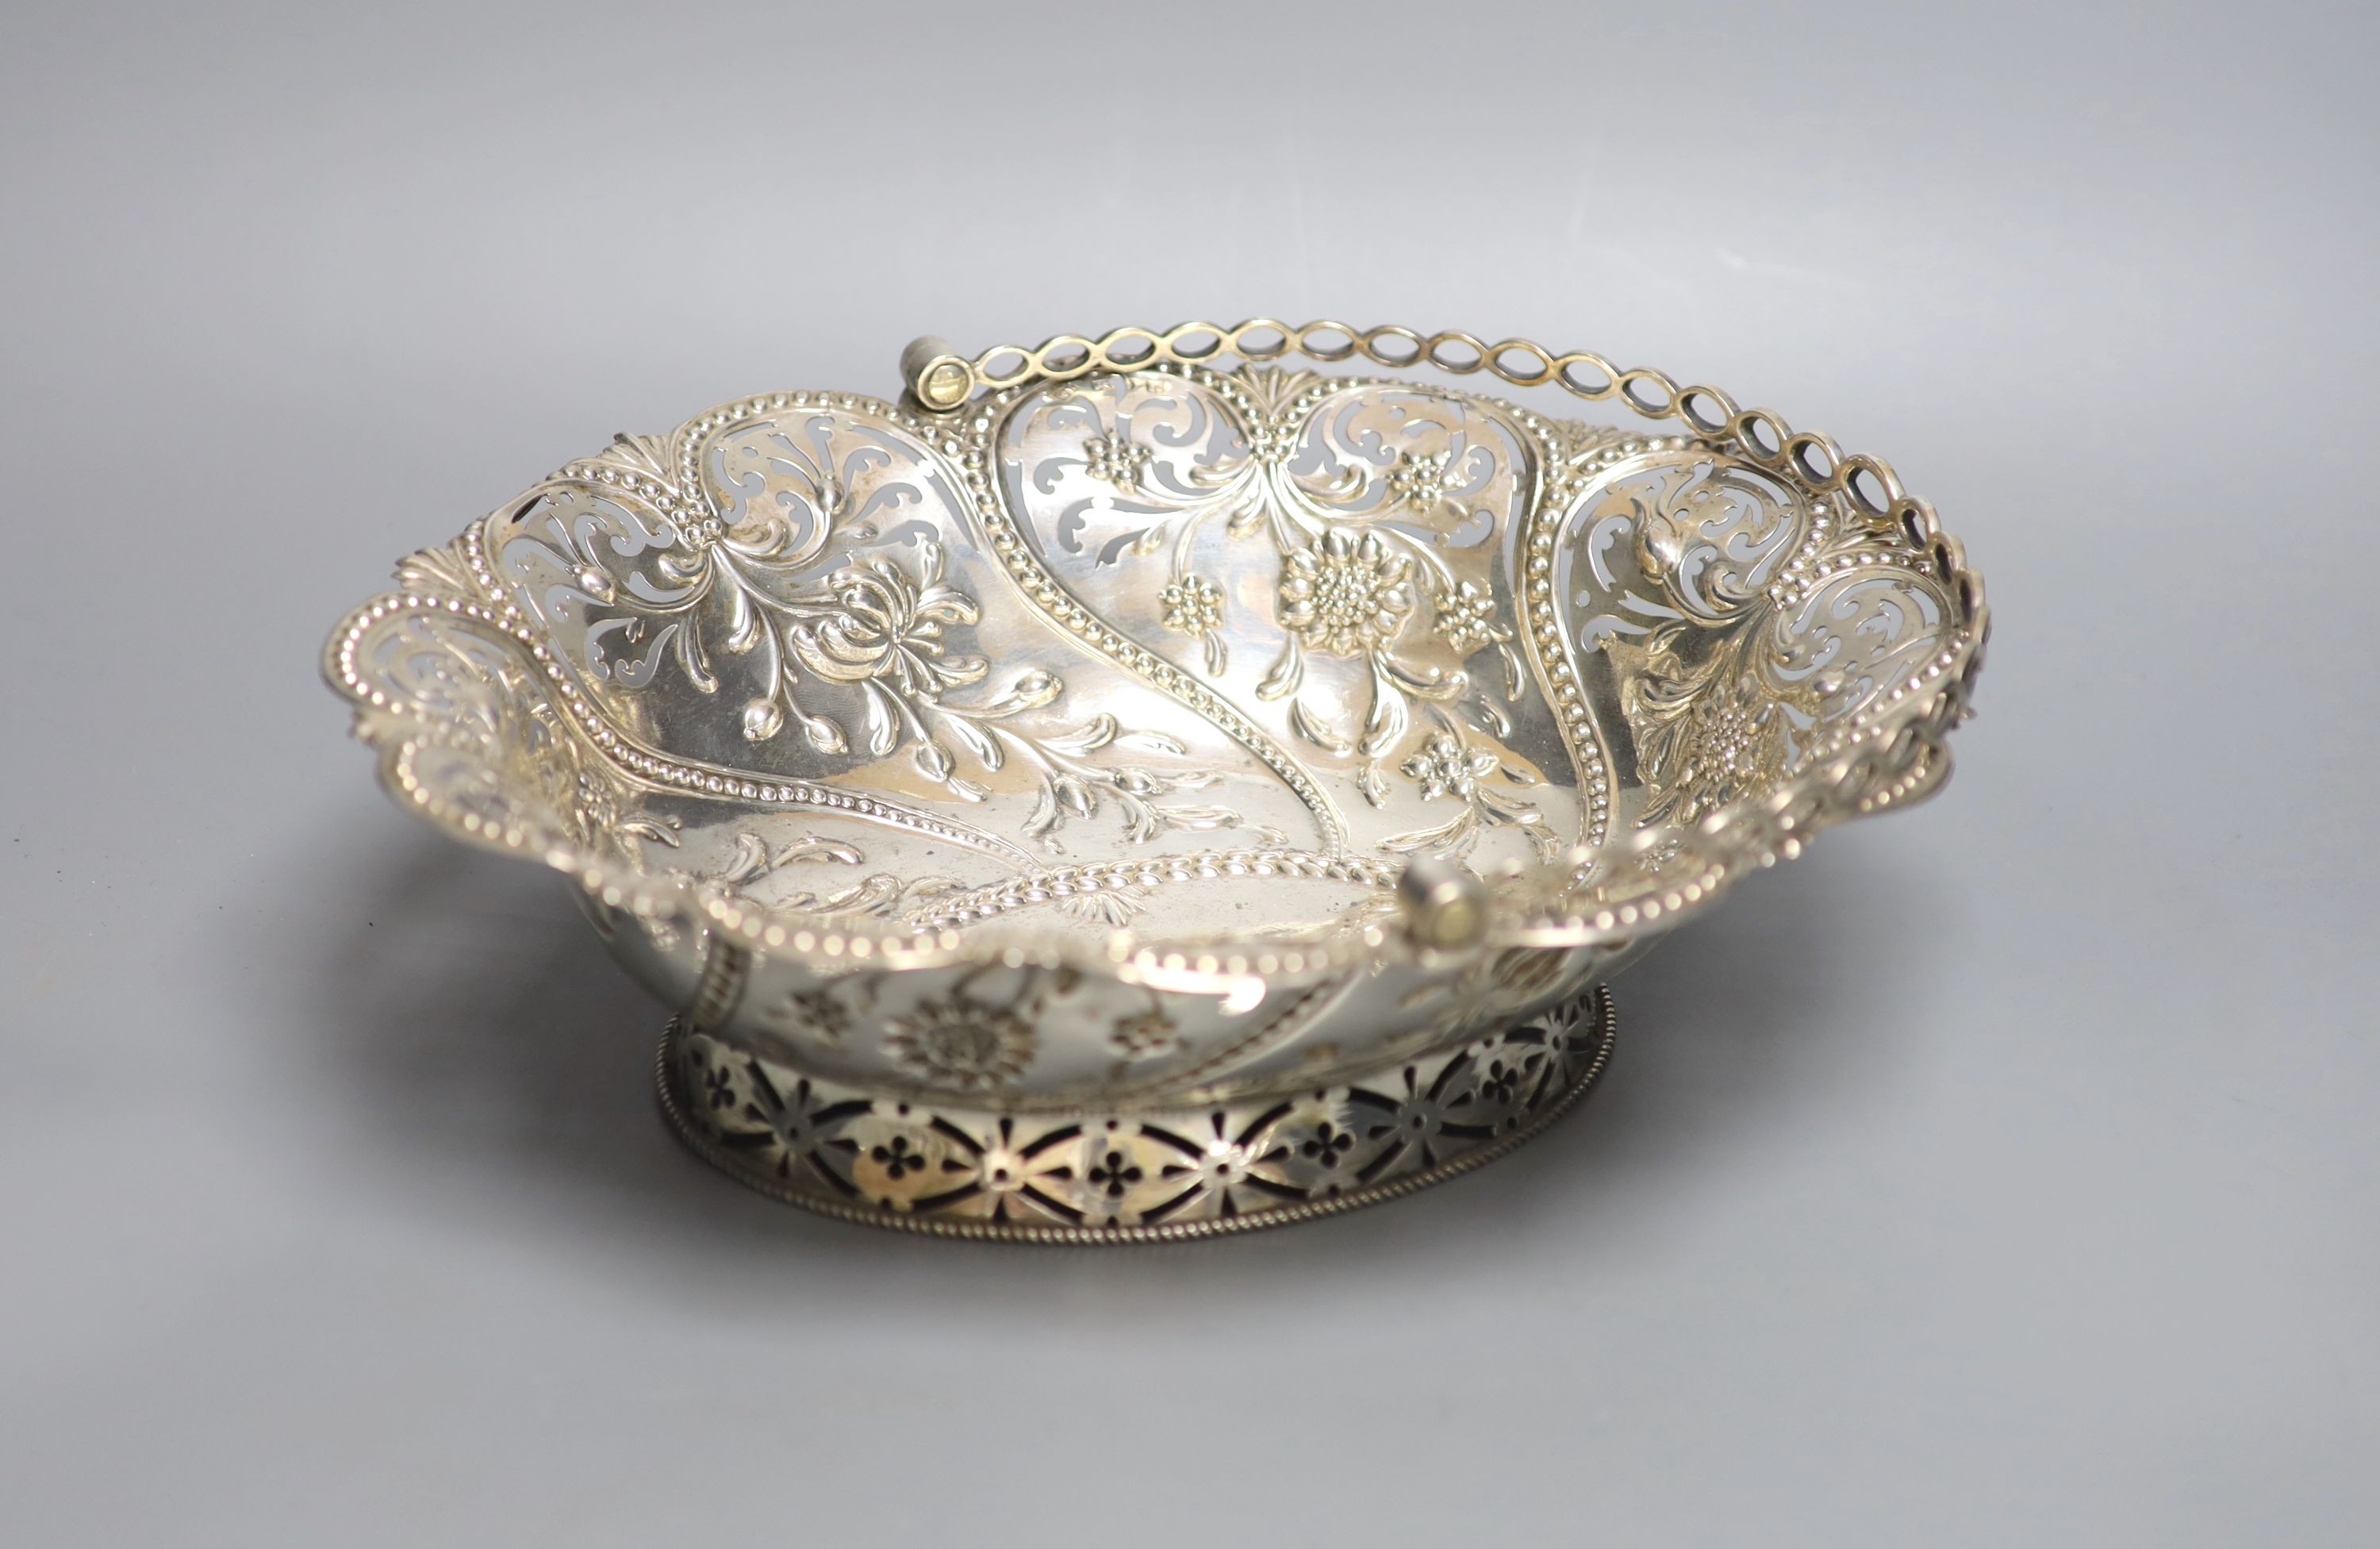 An early George III silver basket, with later? pierced and embossed decoration, Richard Meach, London, 1768, length 30.8cm, 21oz.